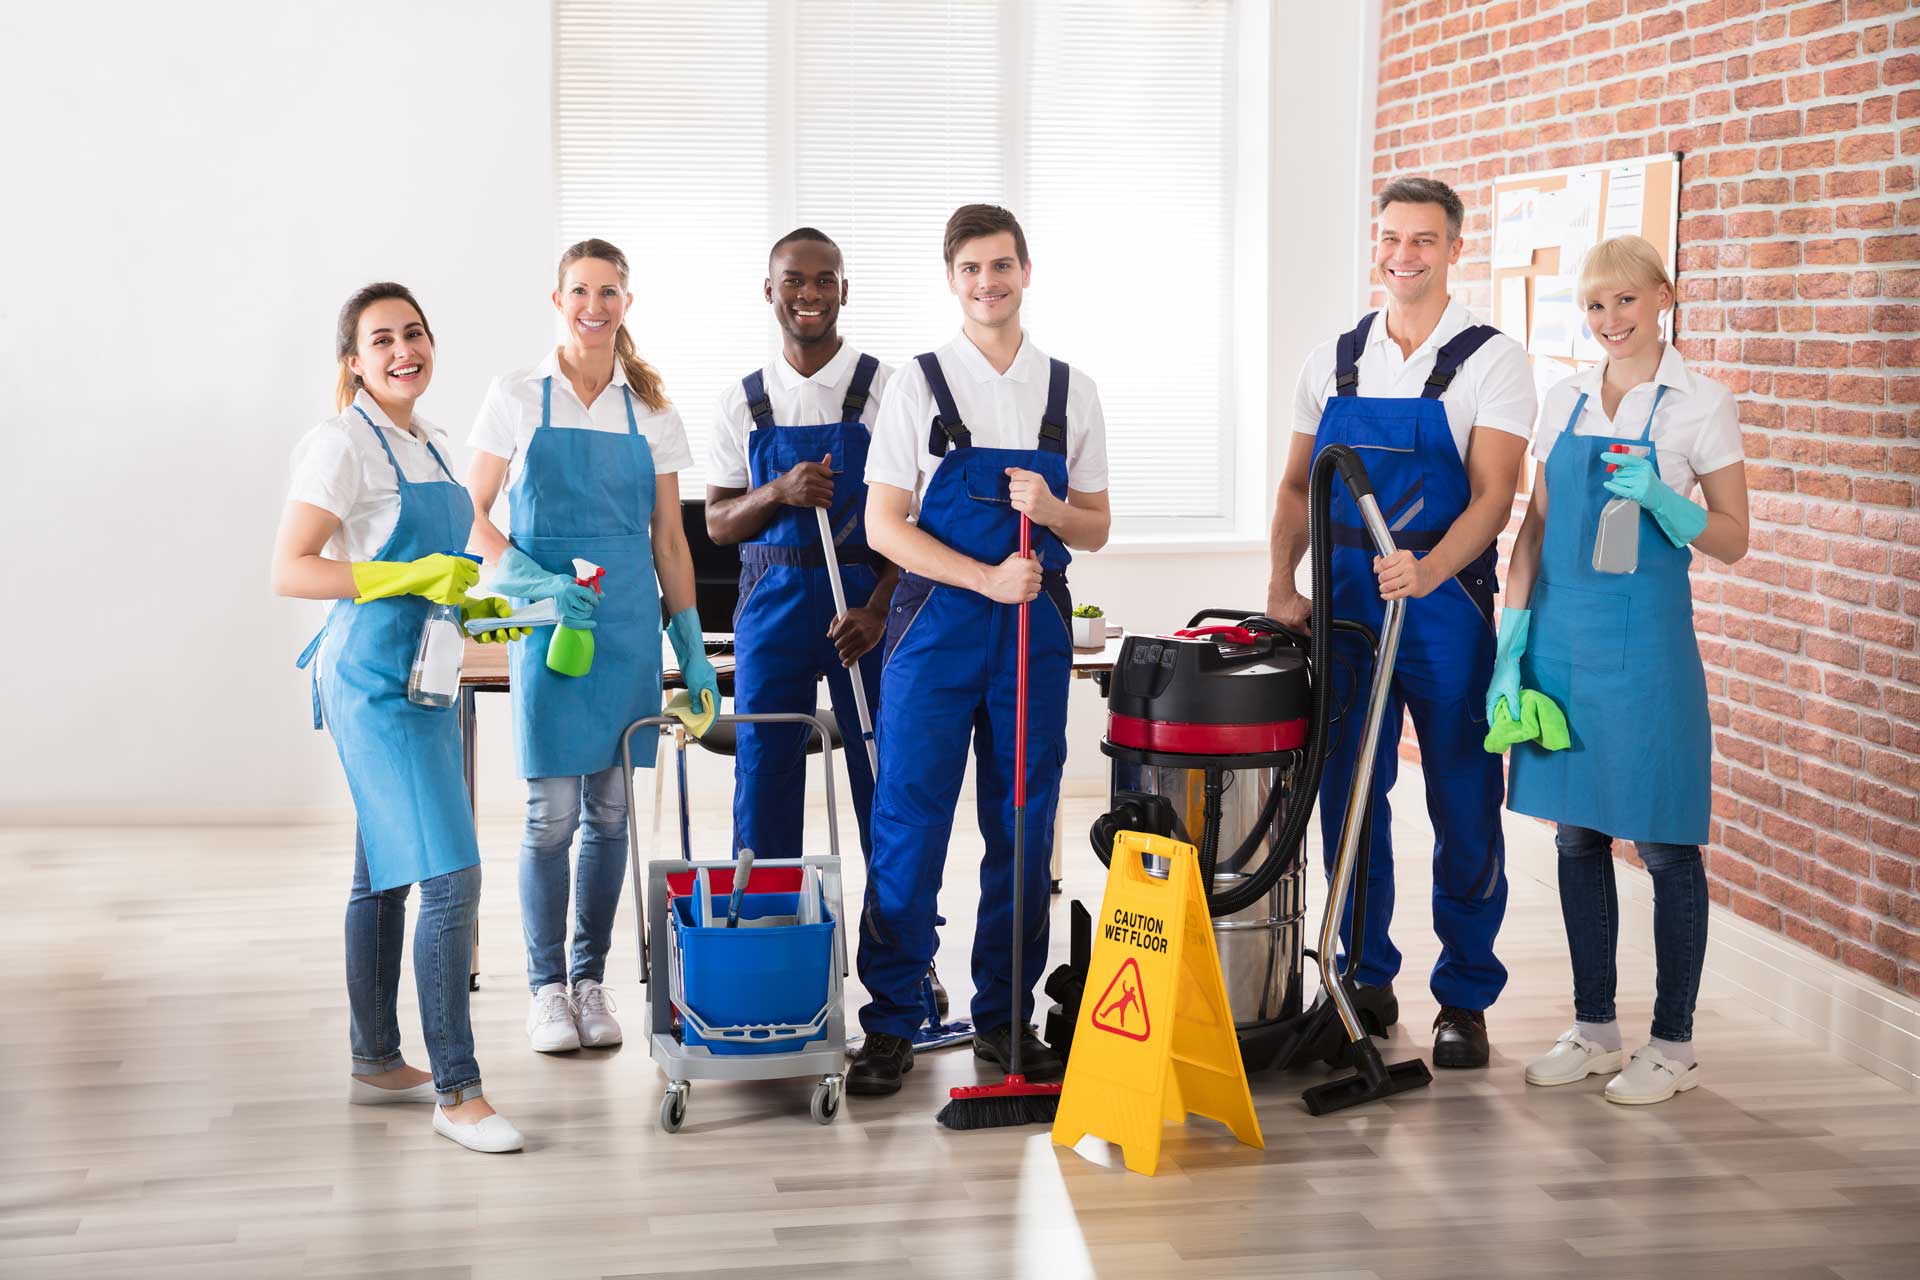 Team of janitors posing with cleaning equipment